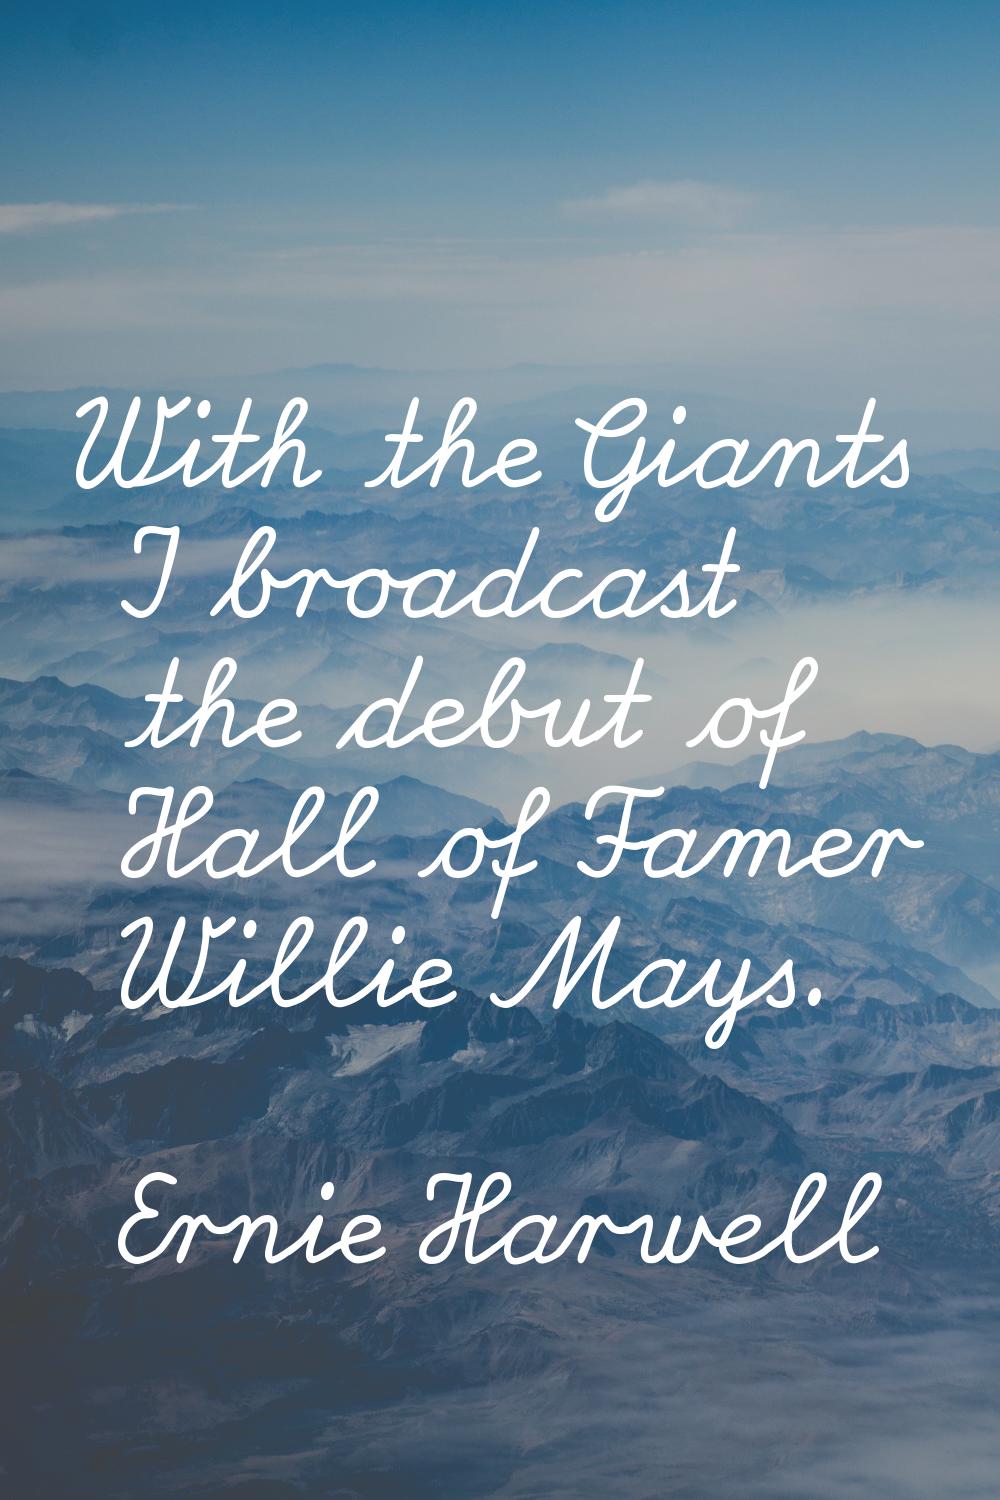 With the Giants I broadcast the debut of Hall of Famer Willie Mays.